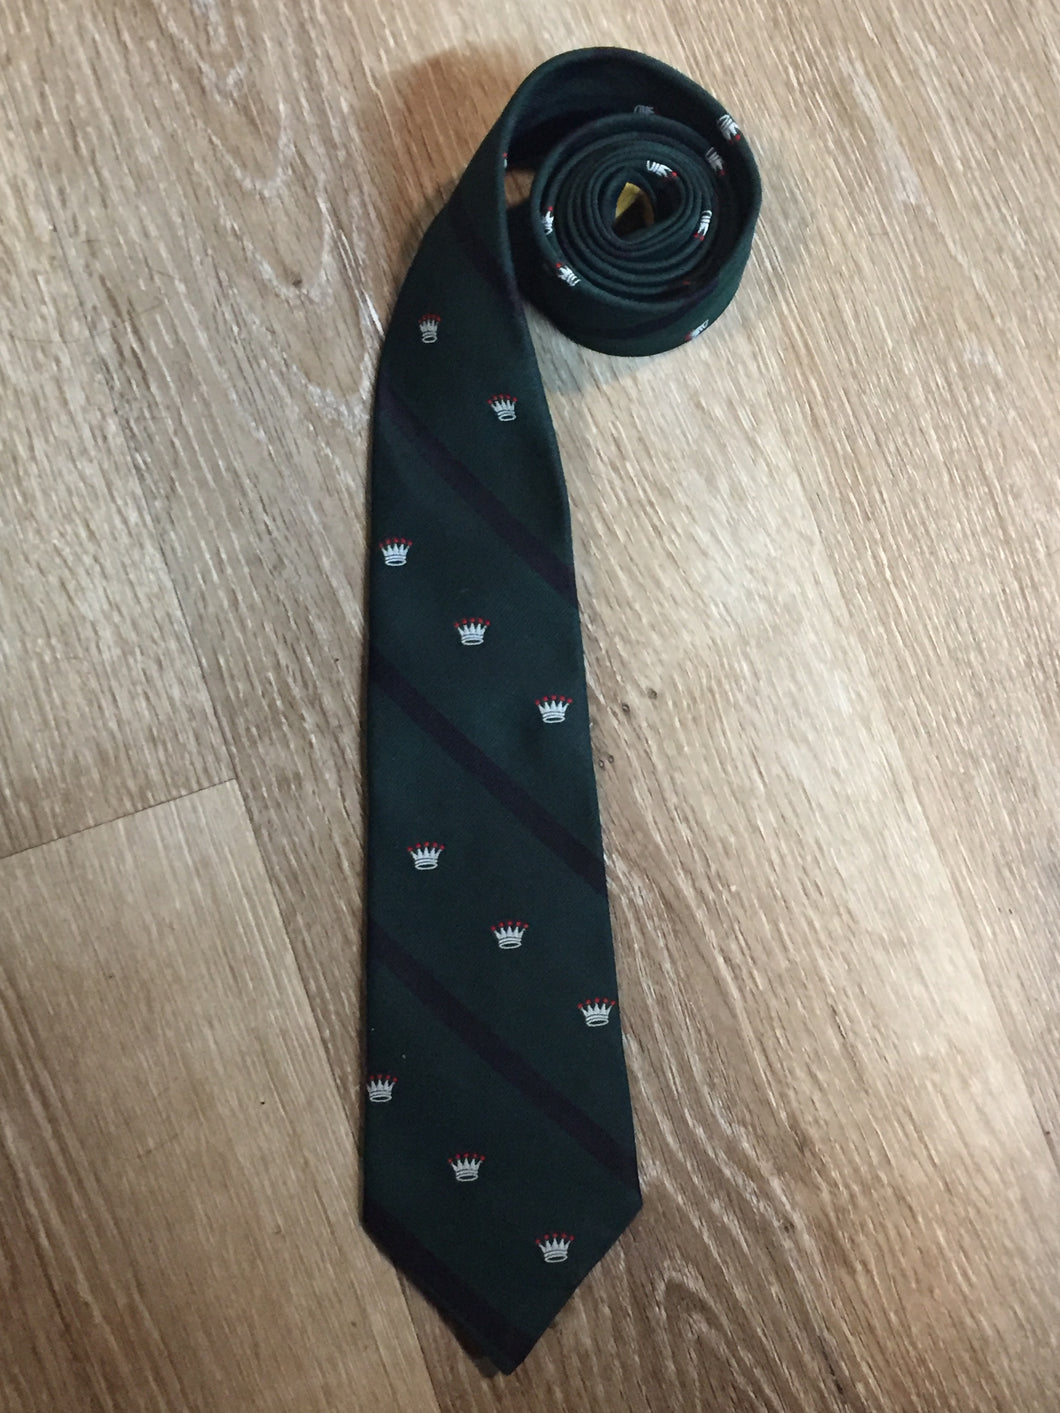 Kingspier Vintage - Golden Clasp by Prince Consort green and navy tie with crown print. Fibres unknown.

Length: 56”
Width: 3”

This tie is in excellent condition.